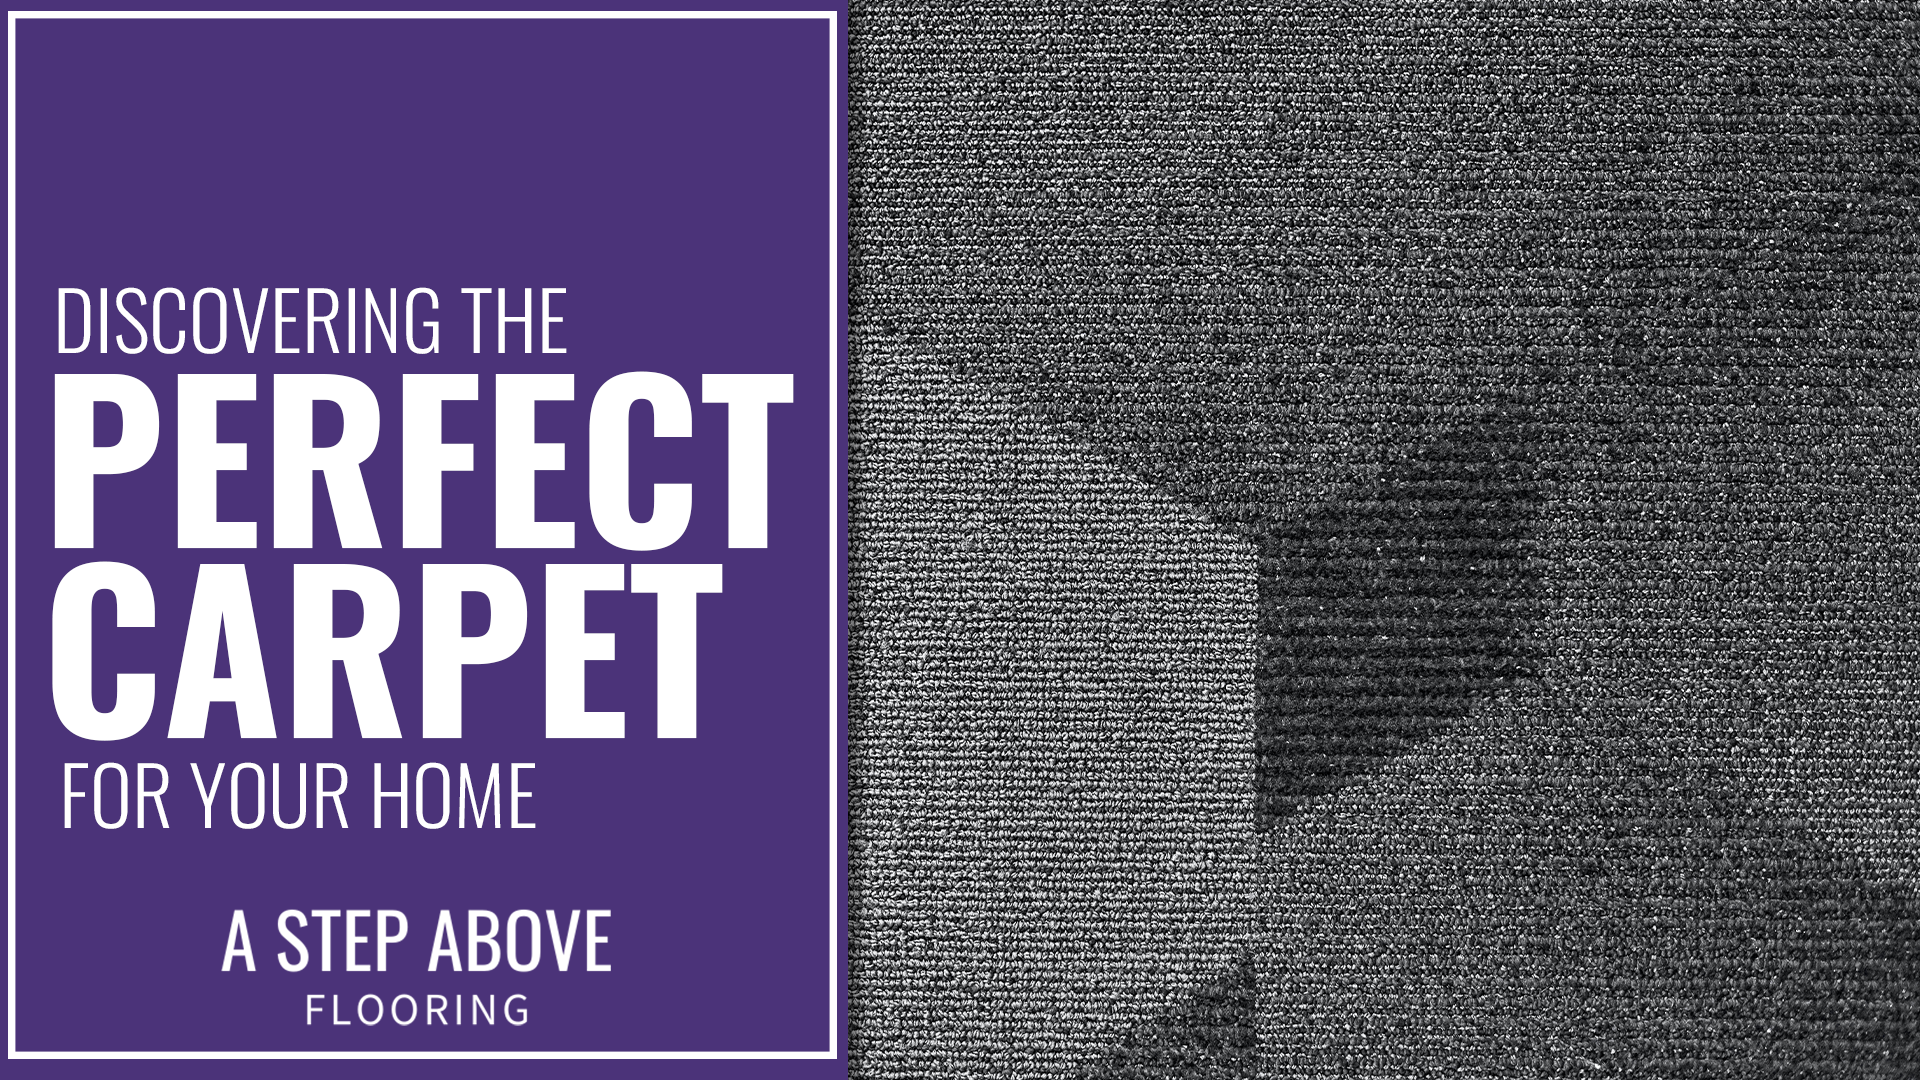 Discovering the Perfect Carpet for Your Home